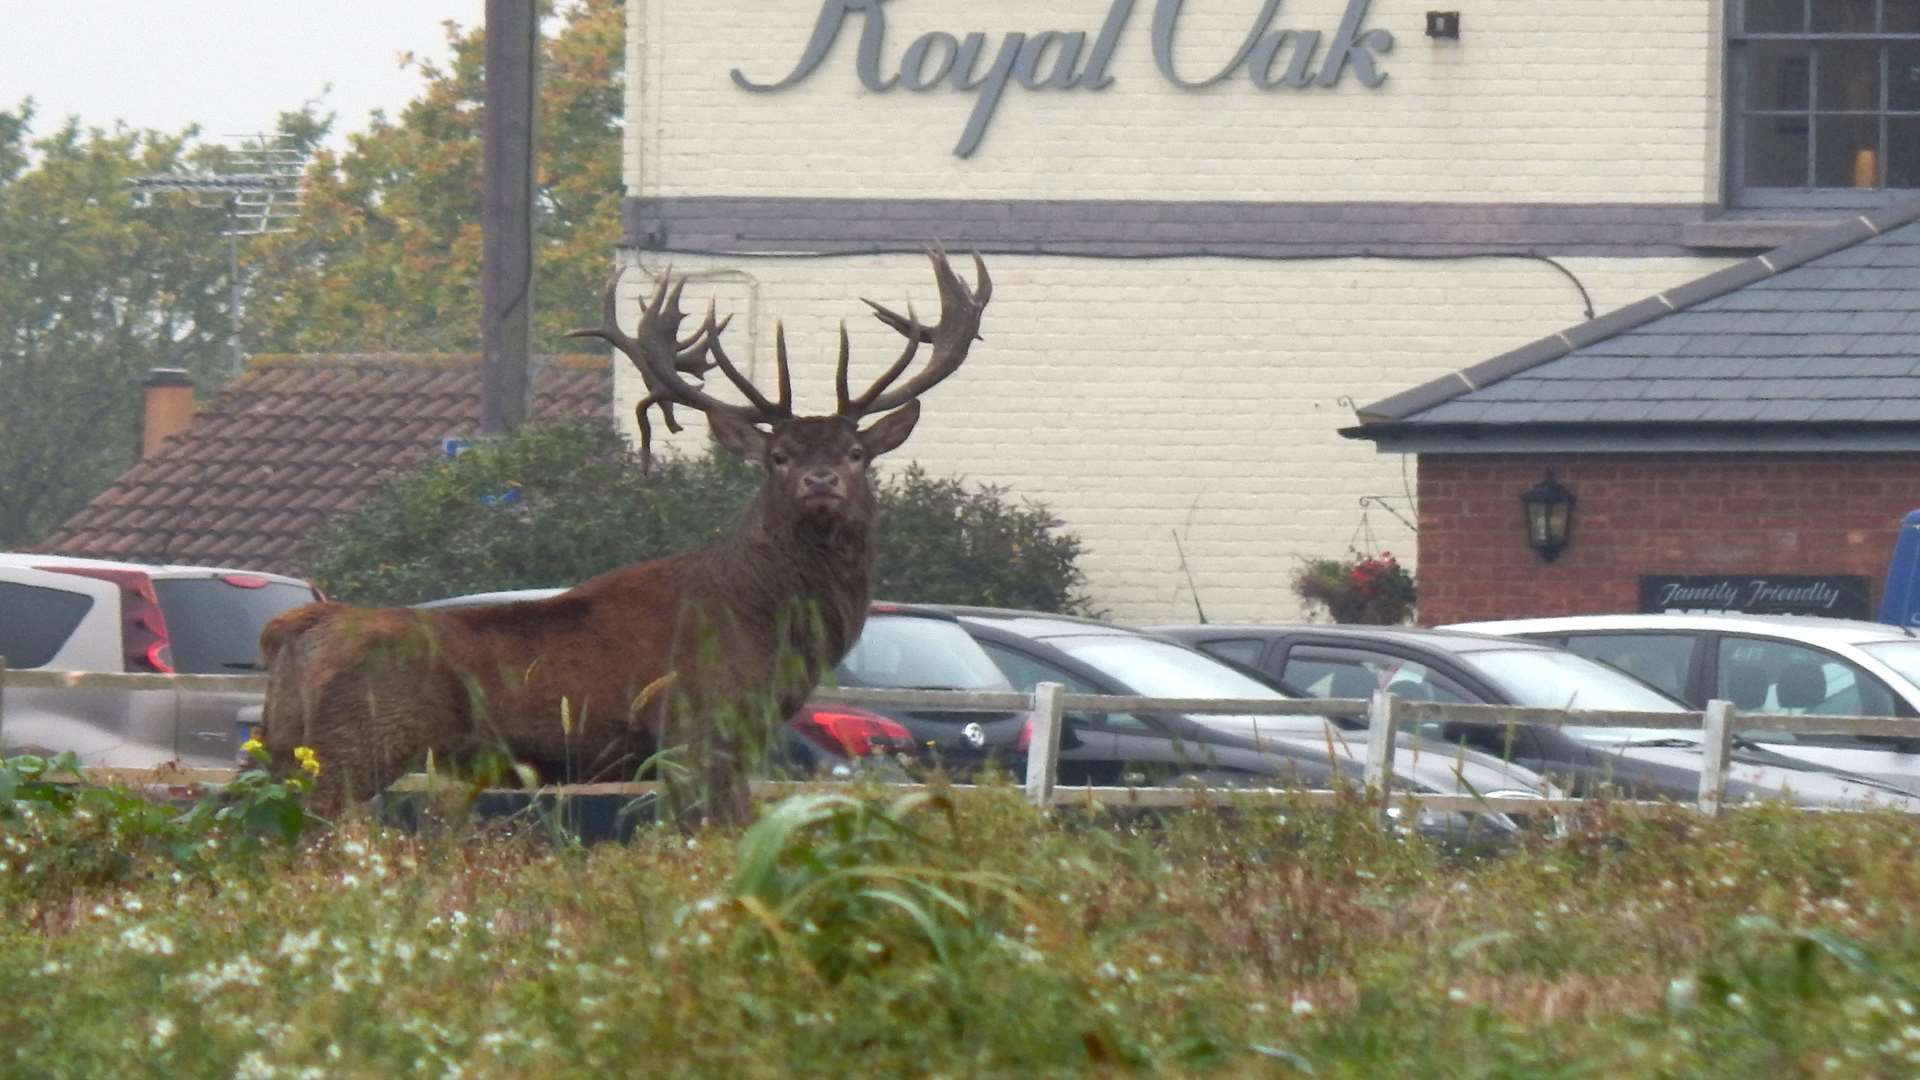 Nelson the stag popped by the Royal Oak at Blean